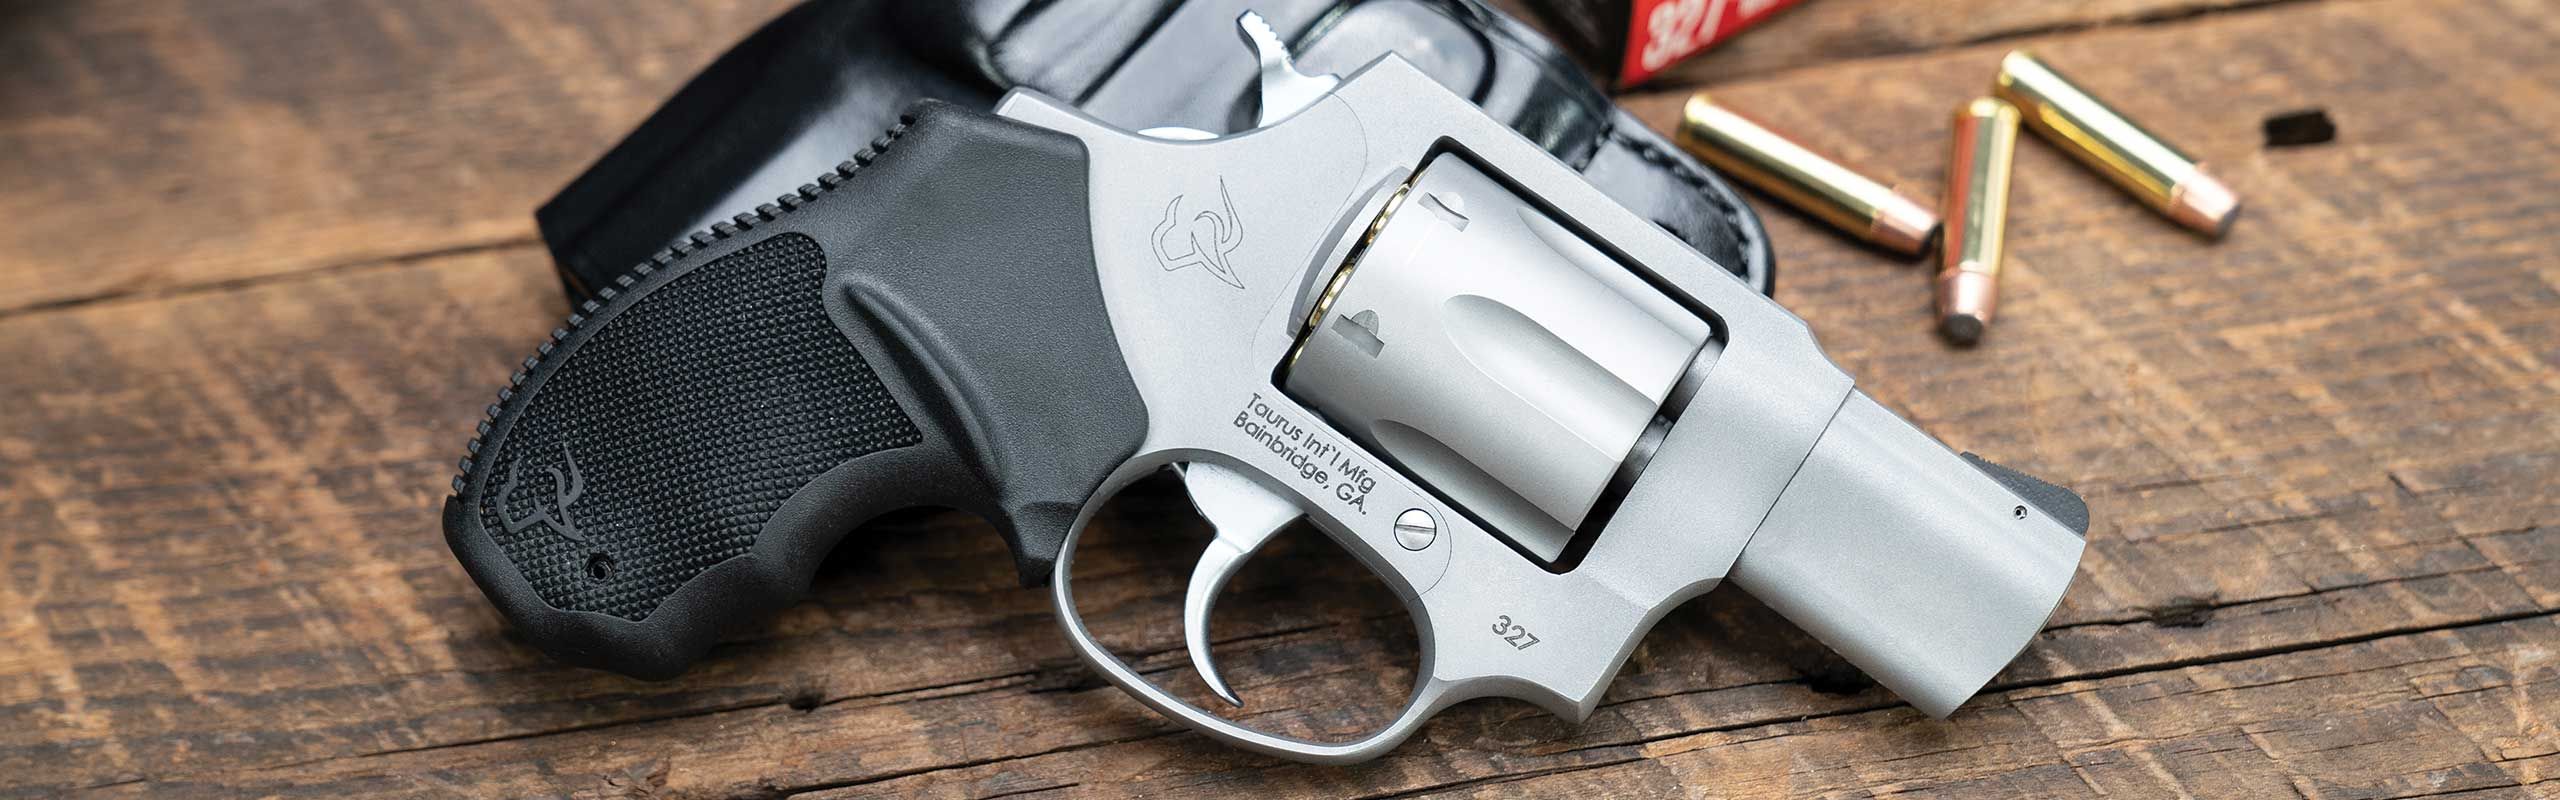 Taurus Small Frame Revolvers - Ideal Concealed Carry